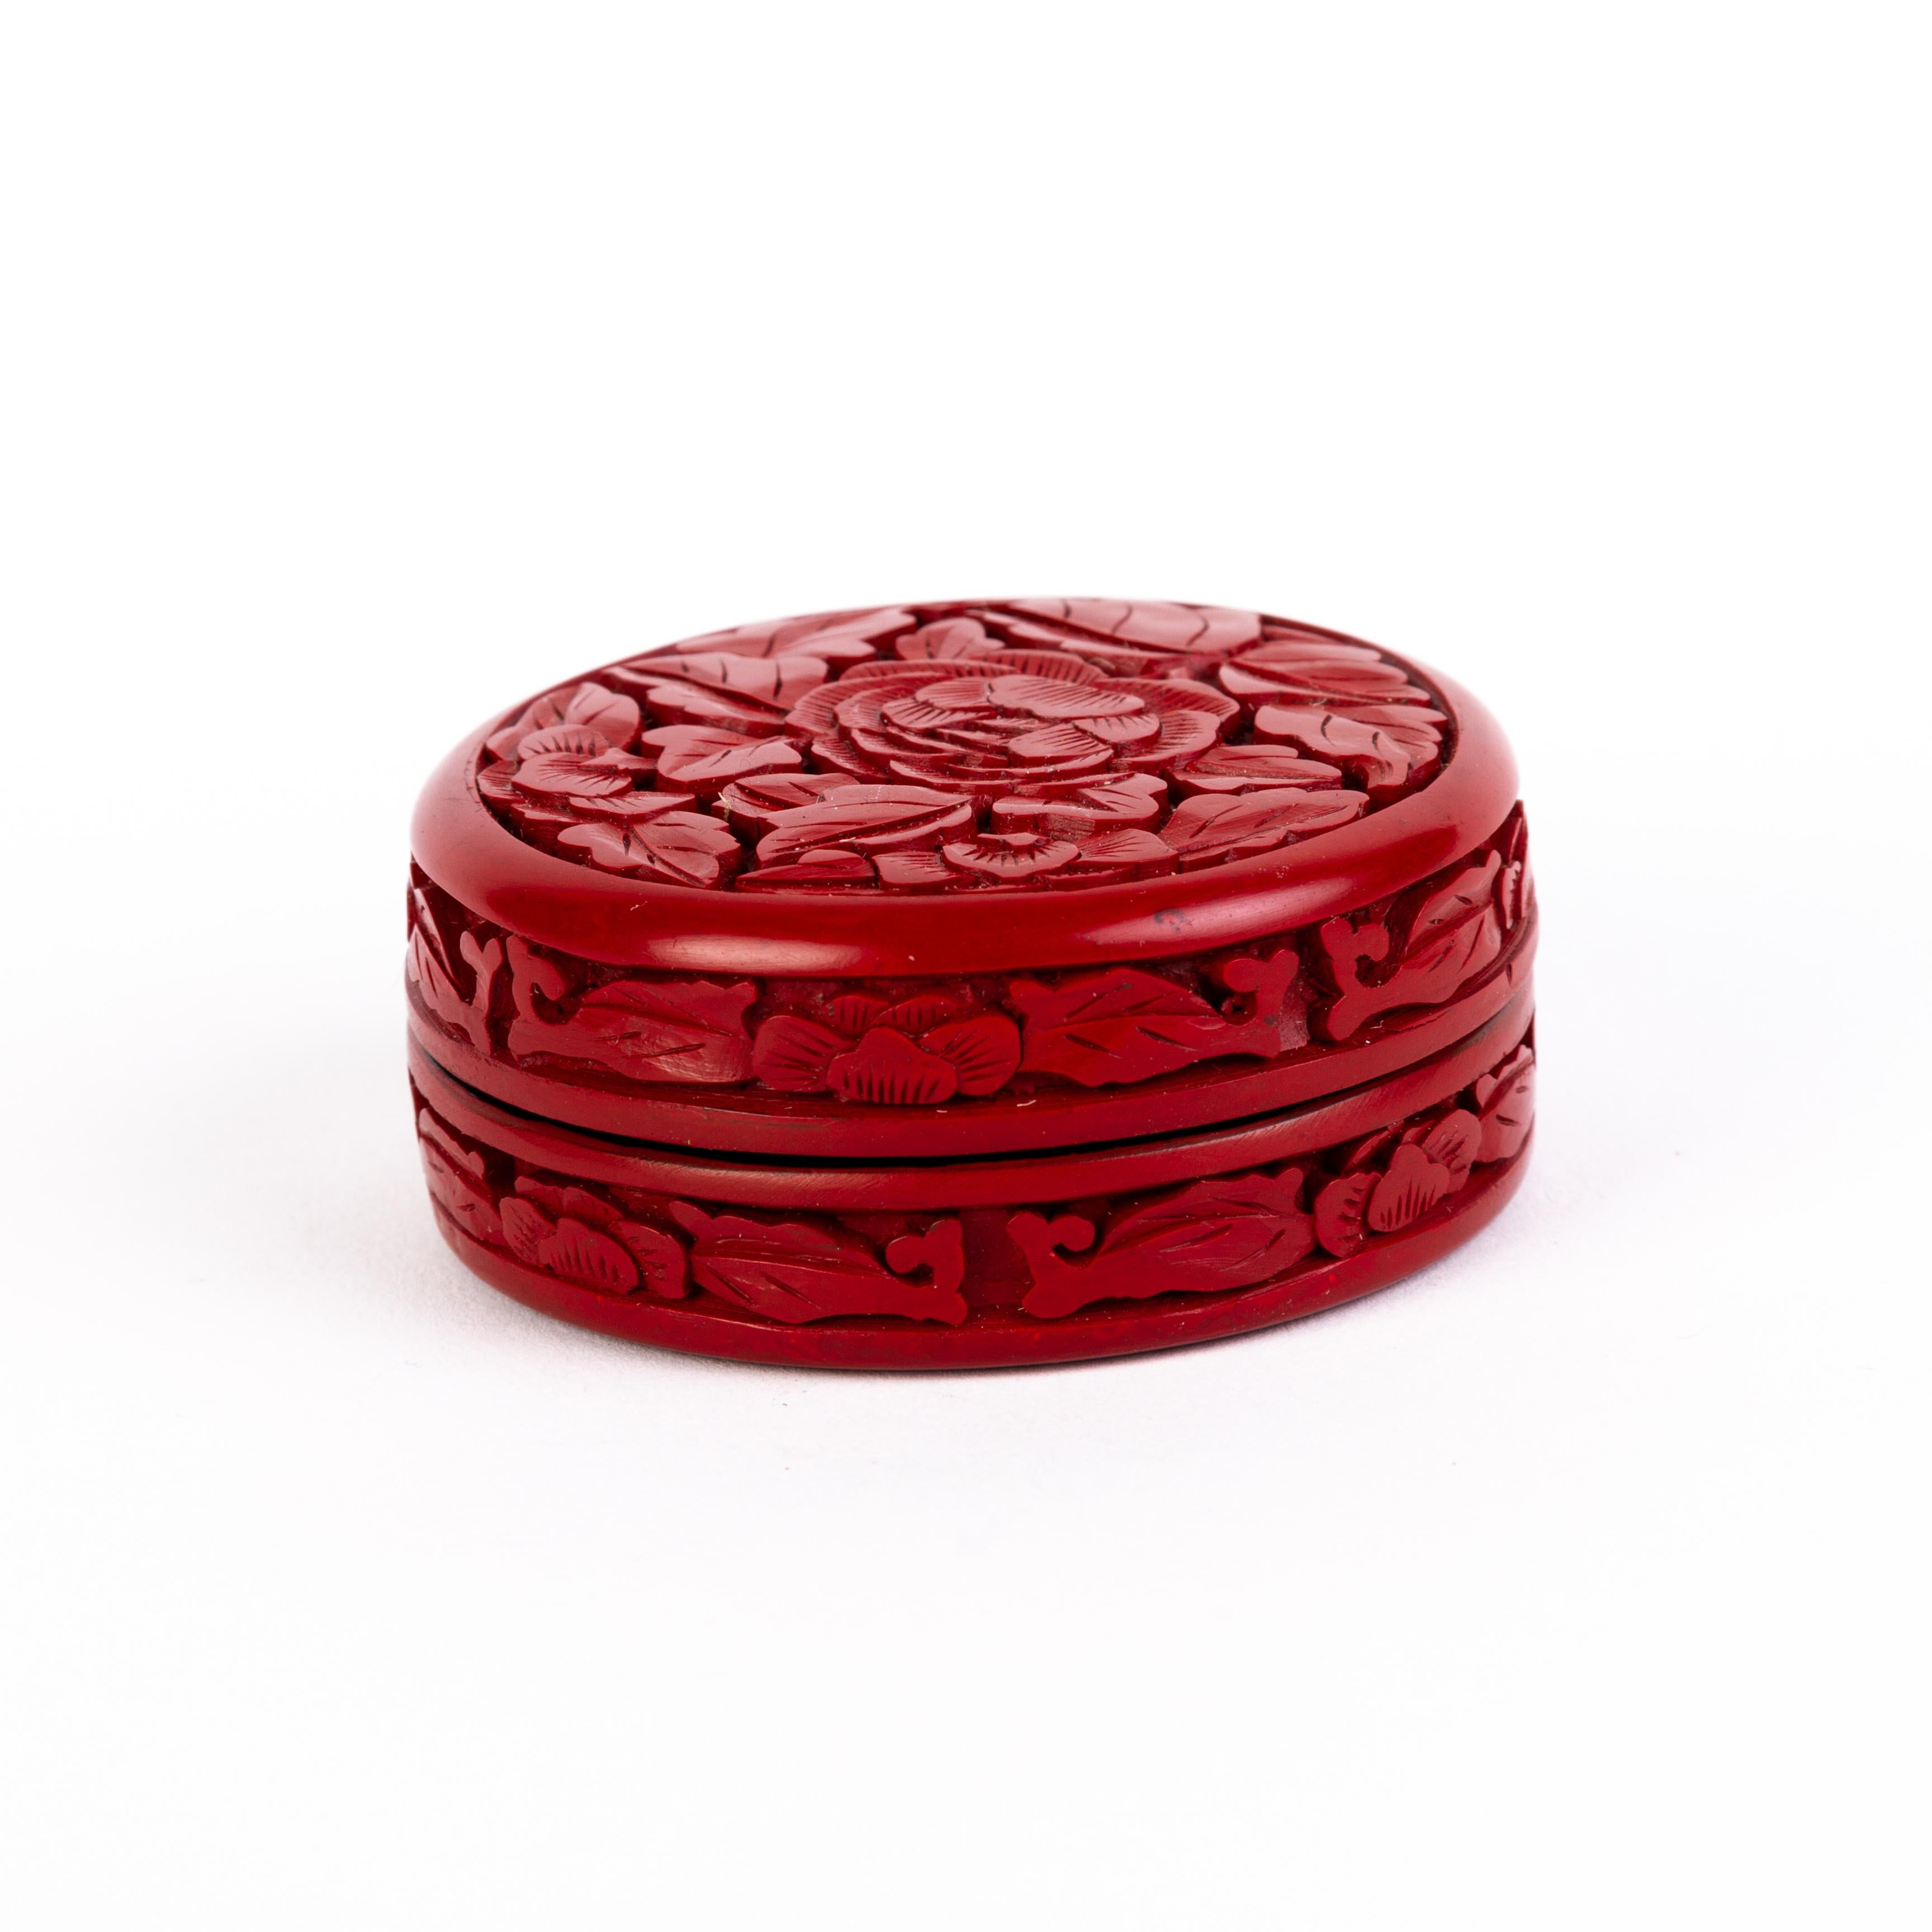 Hand-Carved Chinese Qing Dynasty Carved Cinnabar Lacquer Circular Lidded Box circa 1900 For Sale